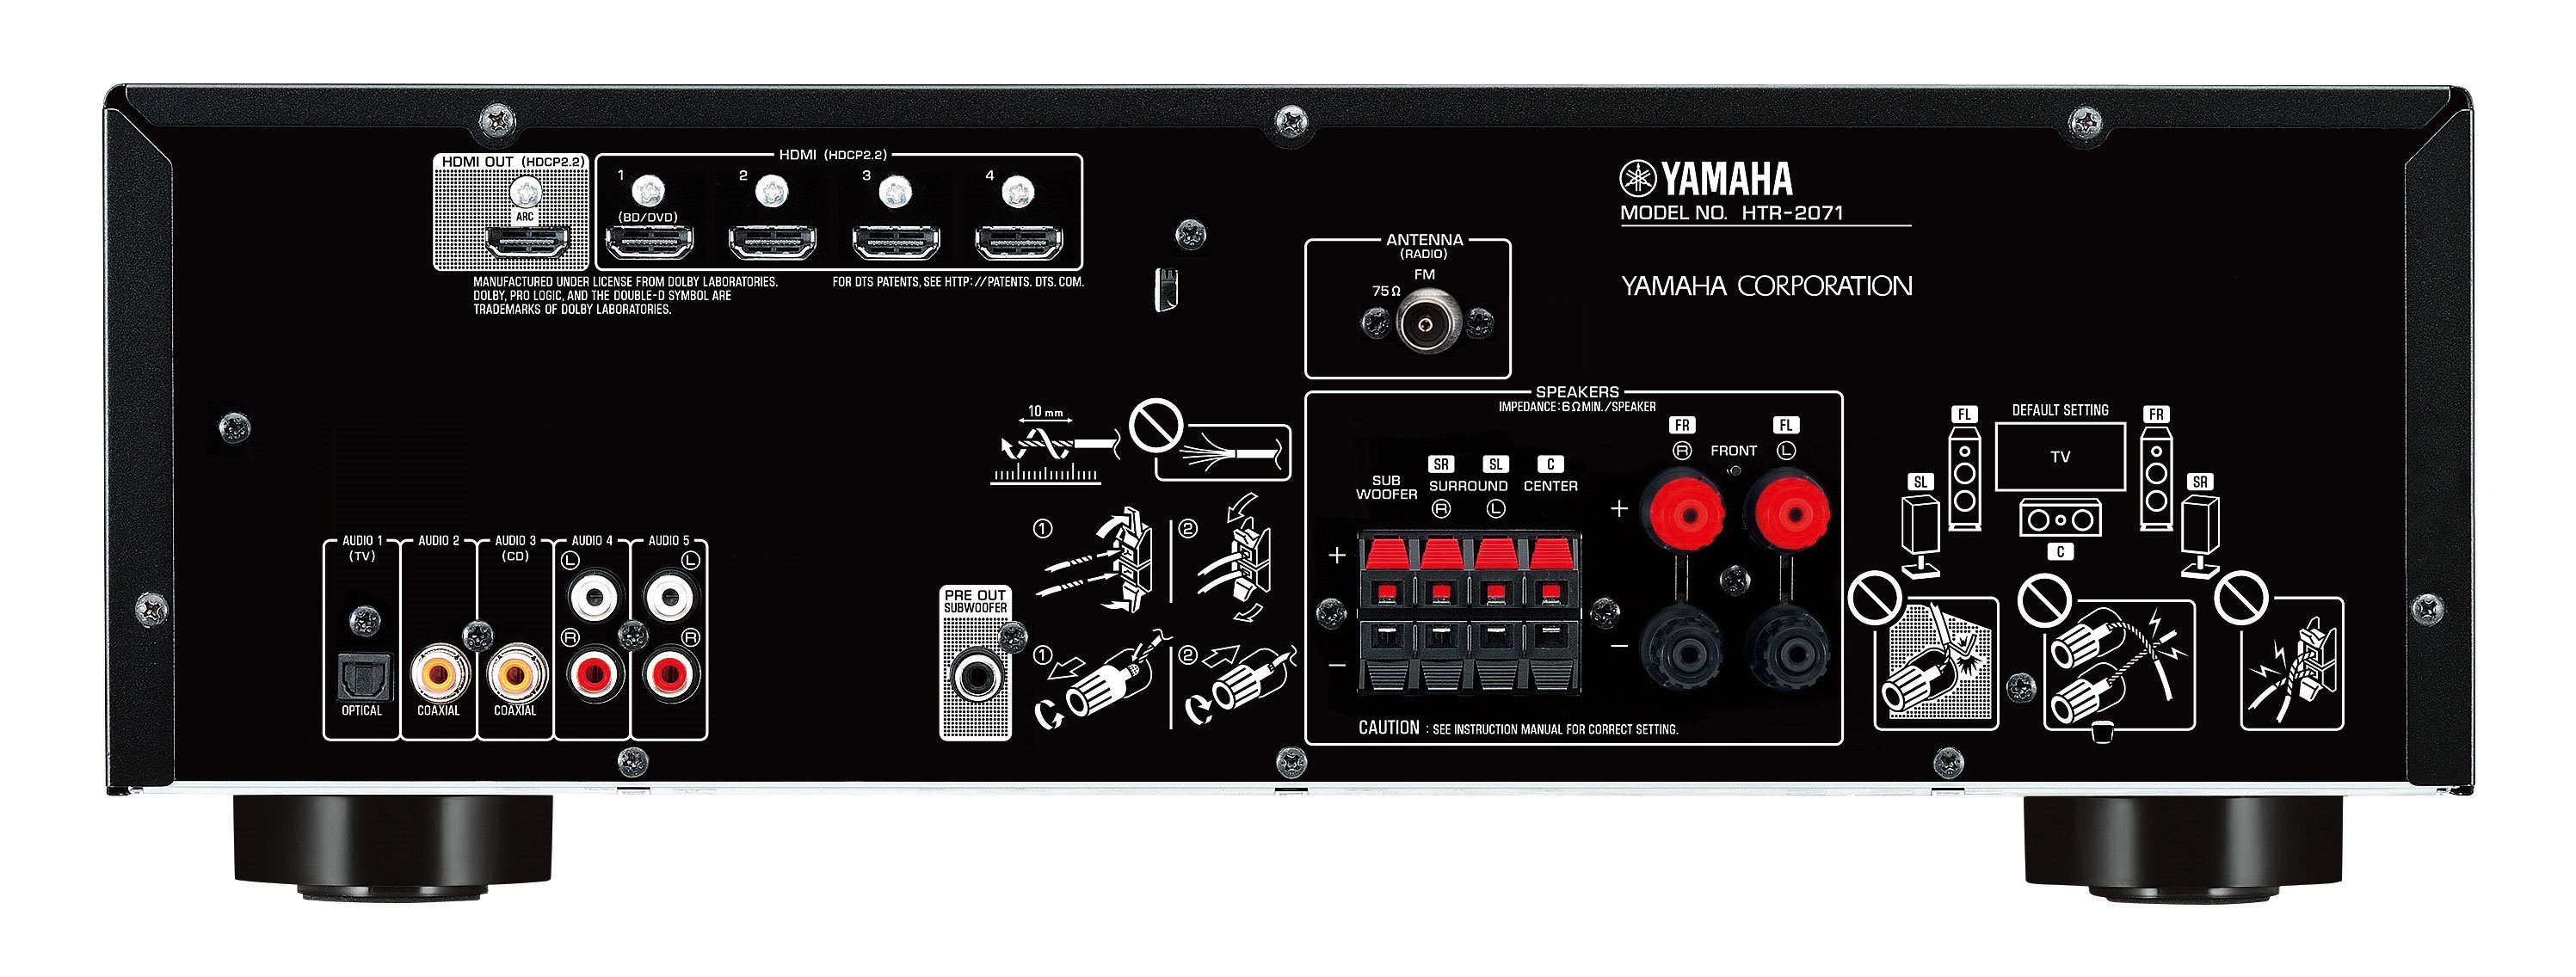 Audio Oceania / YHT-1840 Asia / - Theater CIS / Visual - / America East Africa Home & Latin Systems Middle - / - Yamaha Products - - Overview